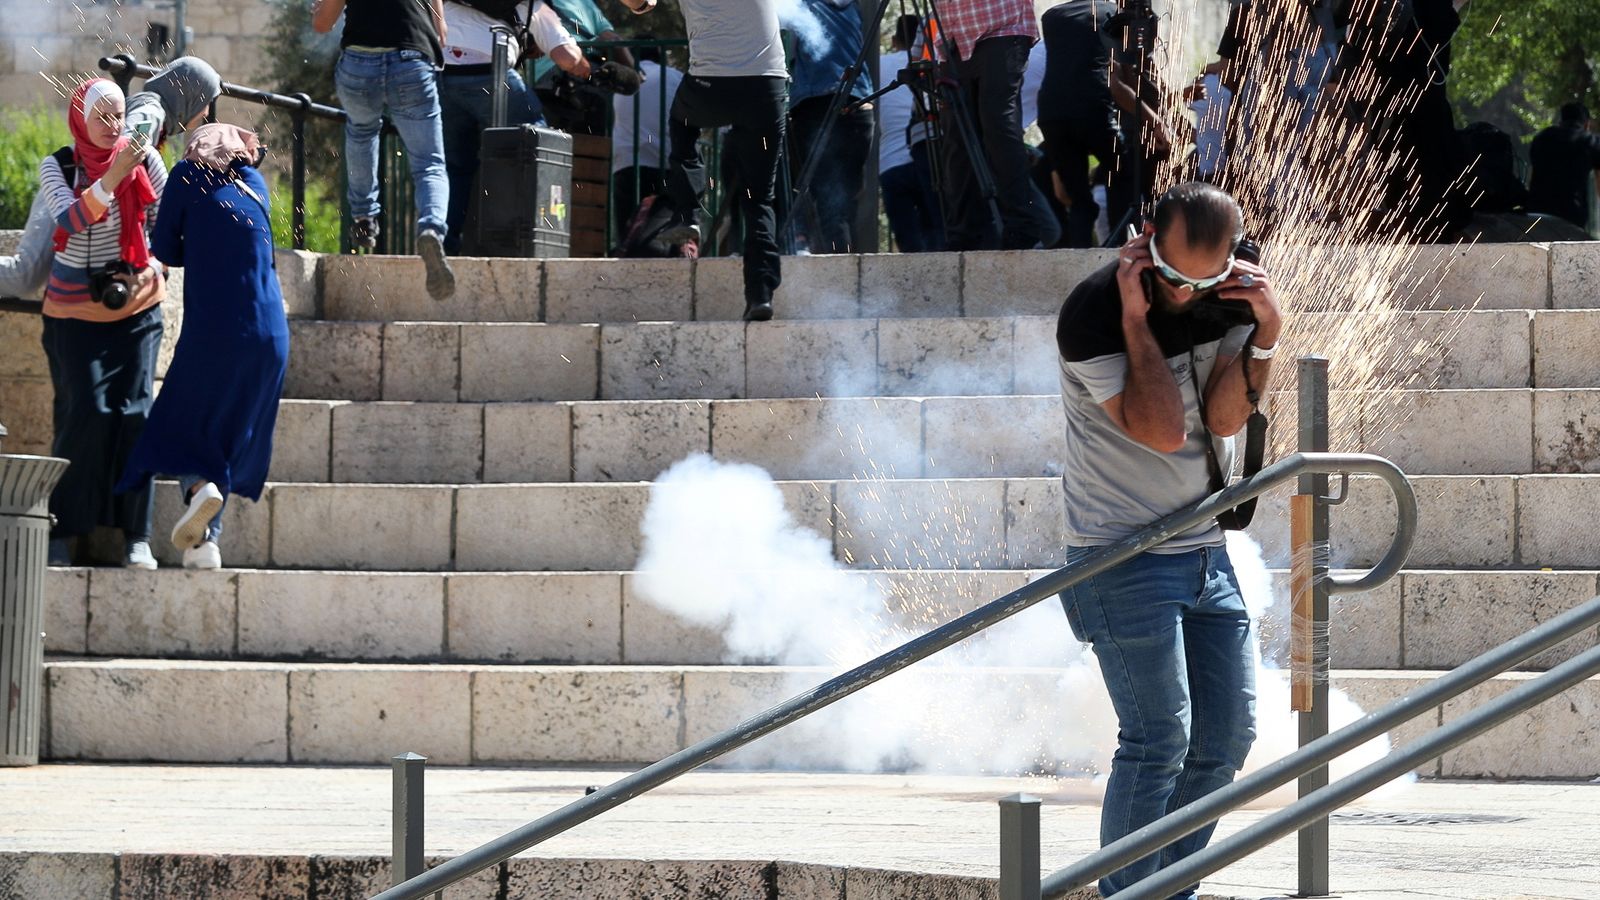 Palestinian protesters dodge stun grenades and 'skunk' spray as skirmishes spread through Jerusalem's Old City